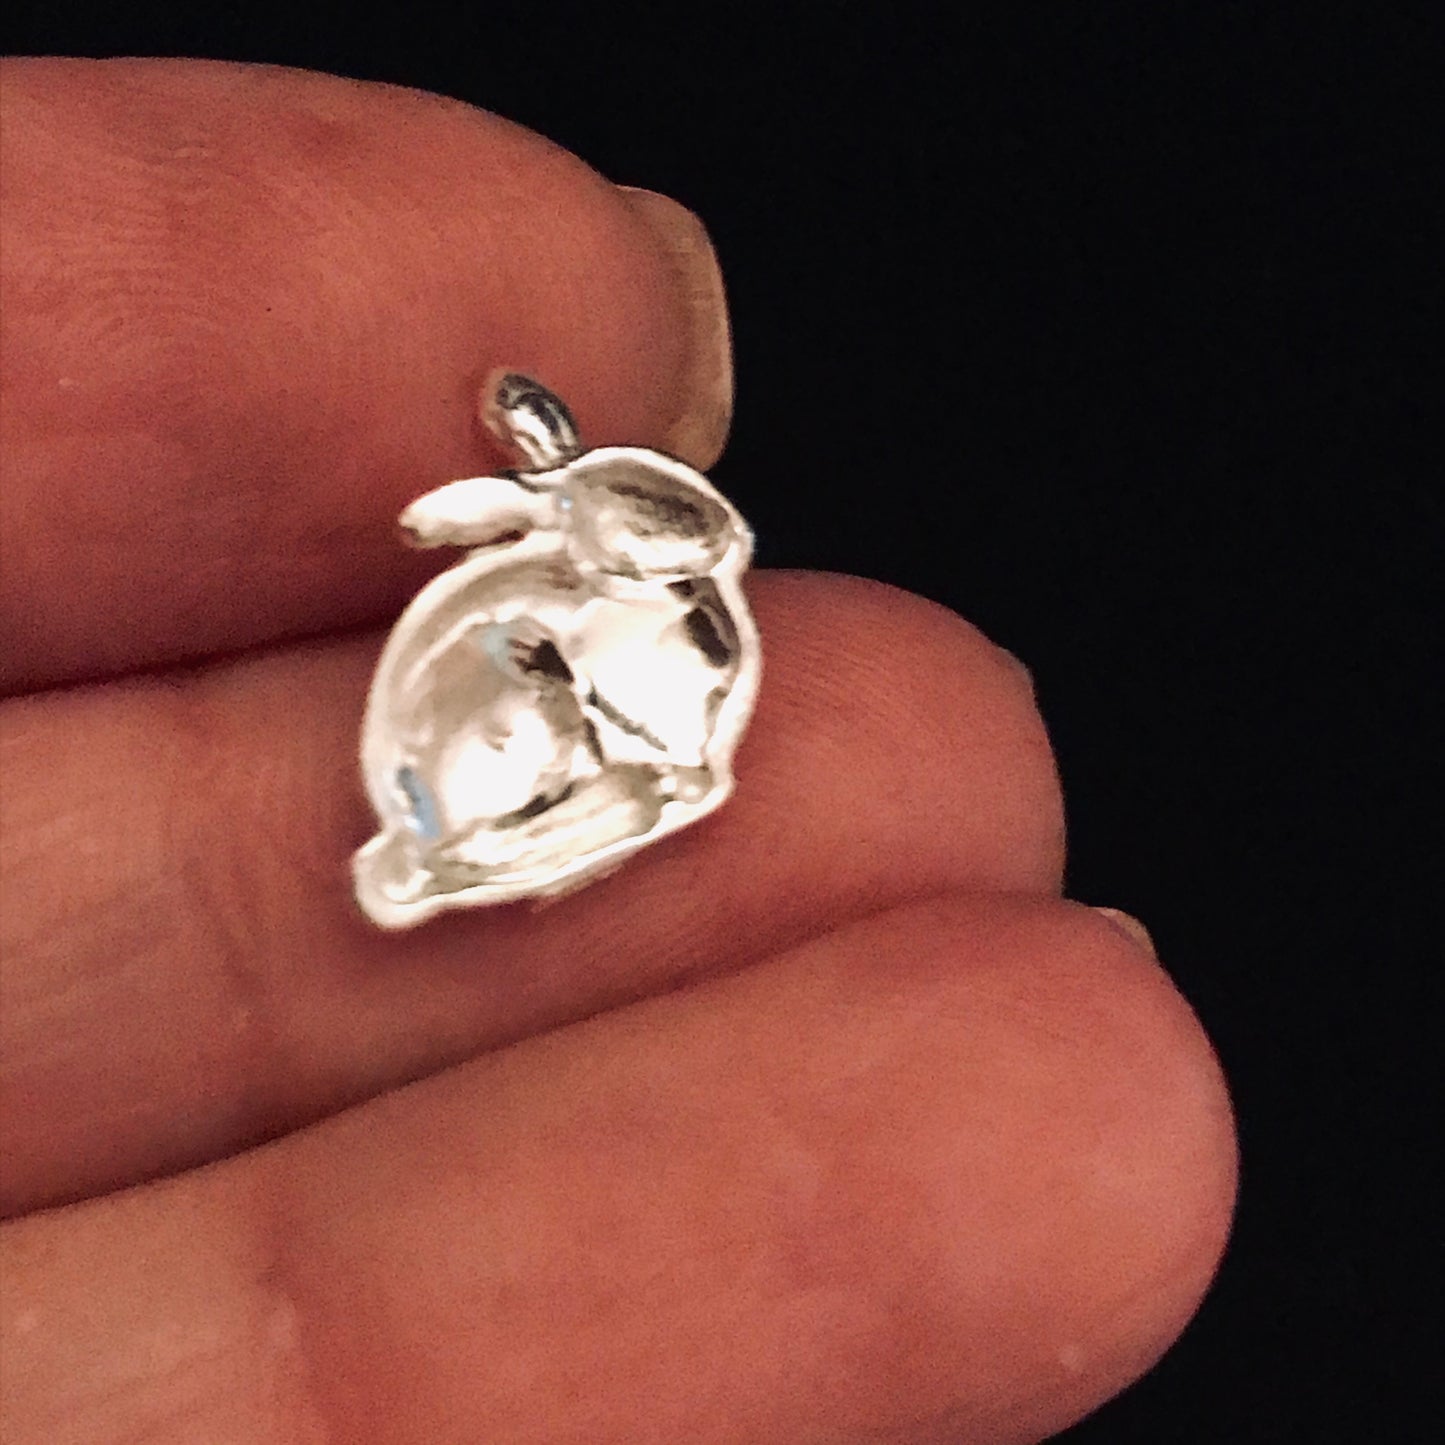 Cast Bunny for Jewelry Design